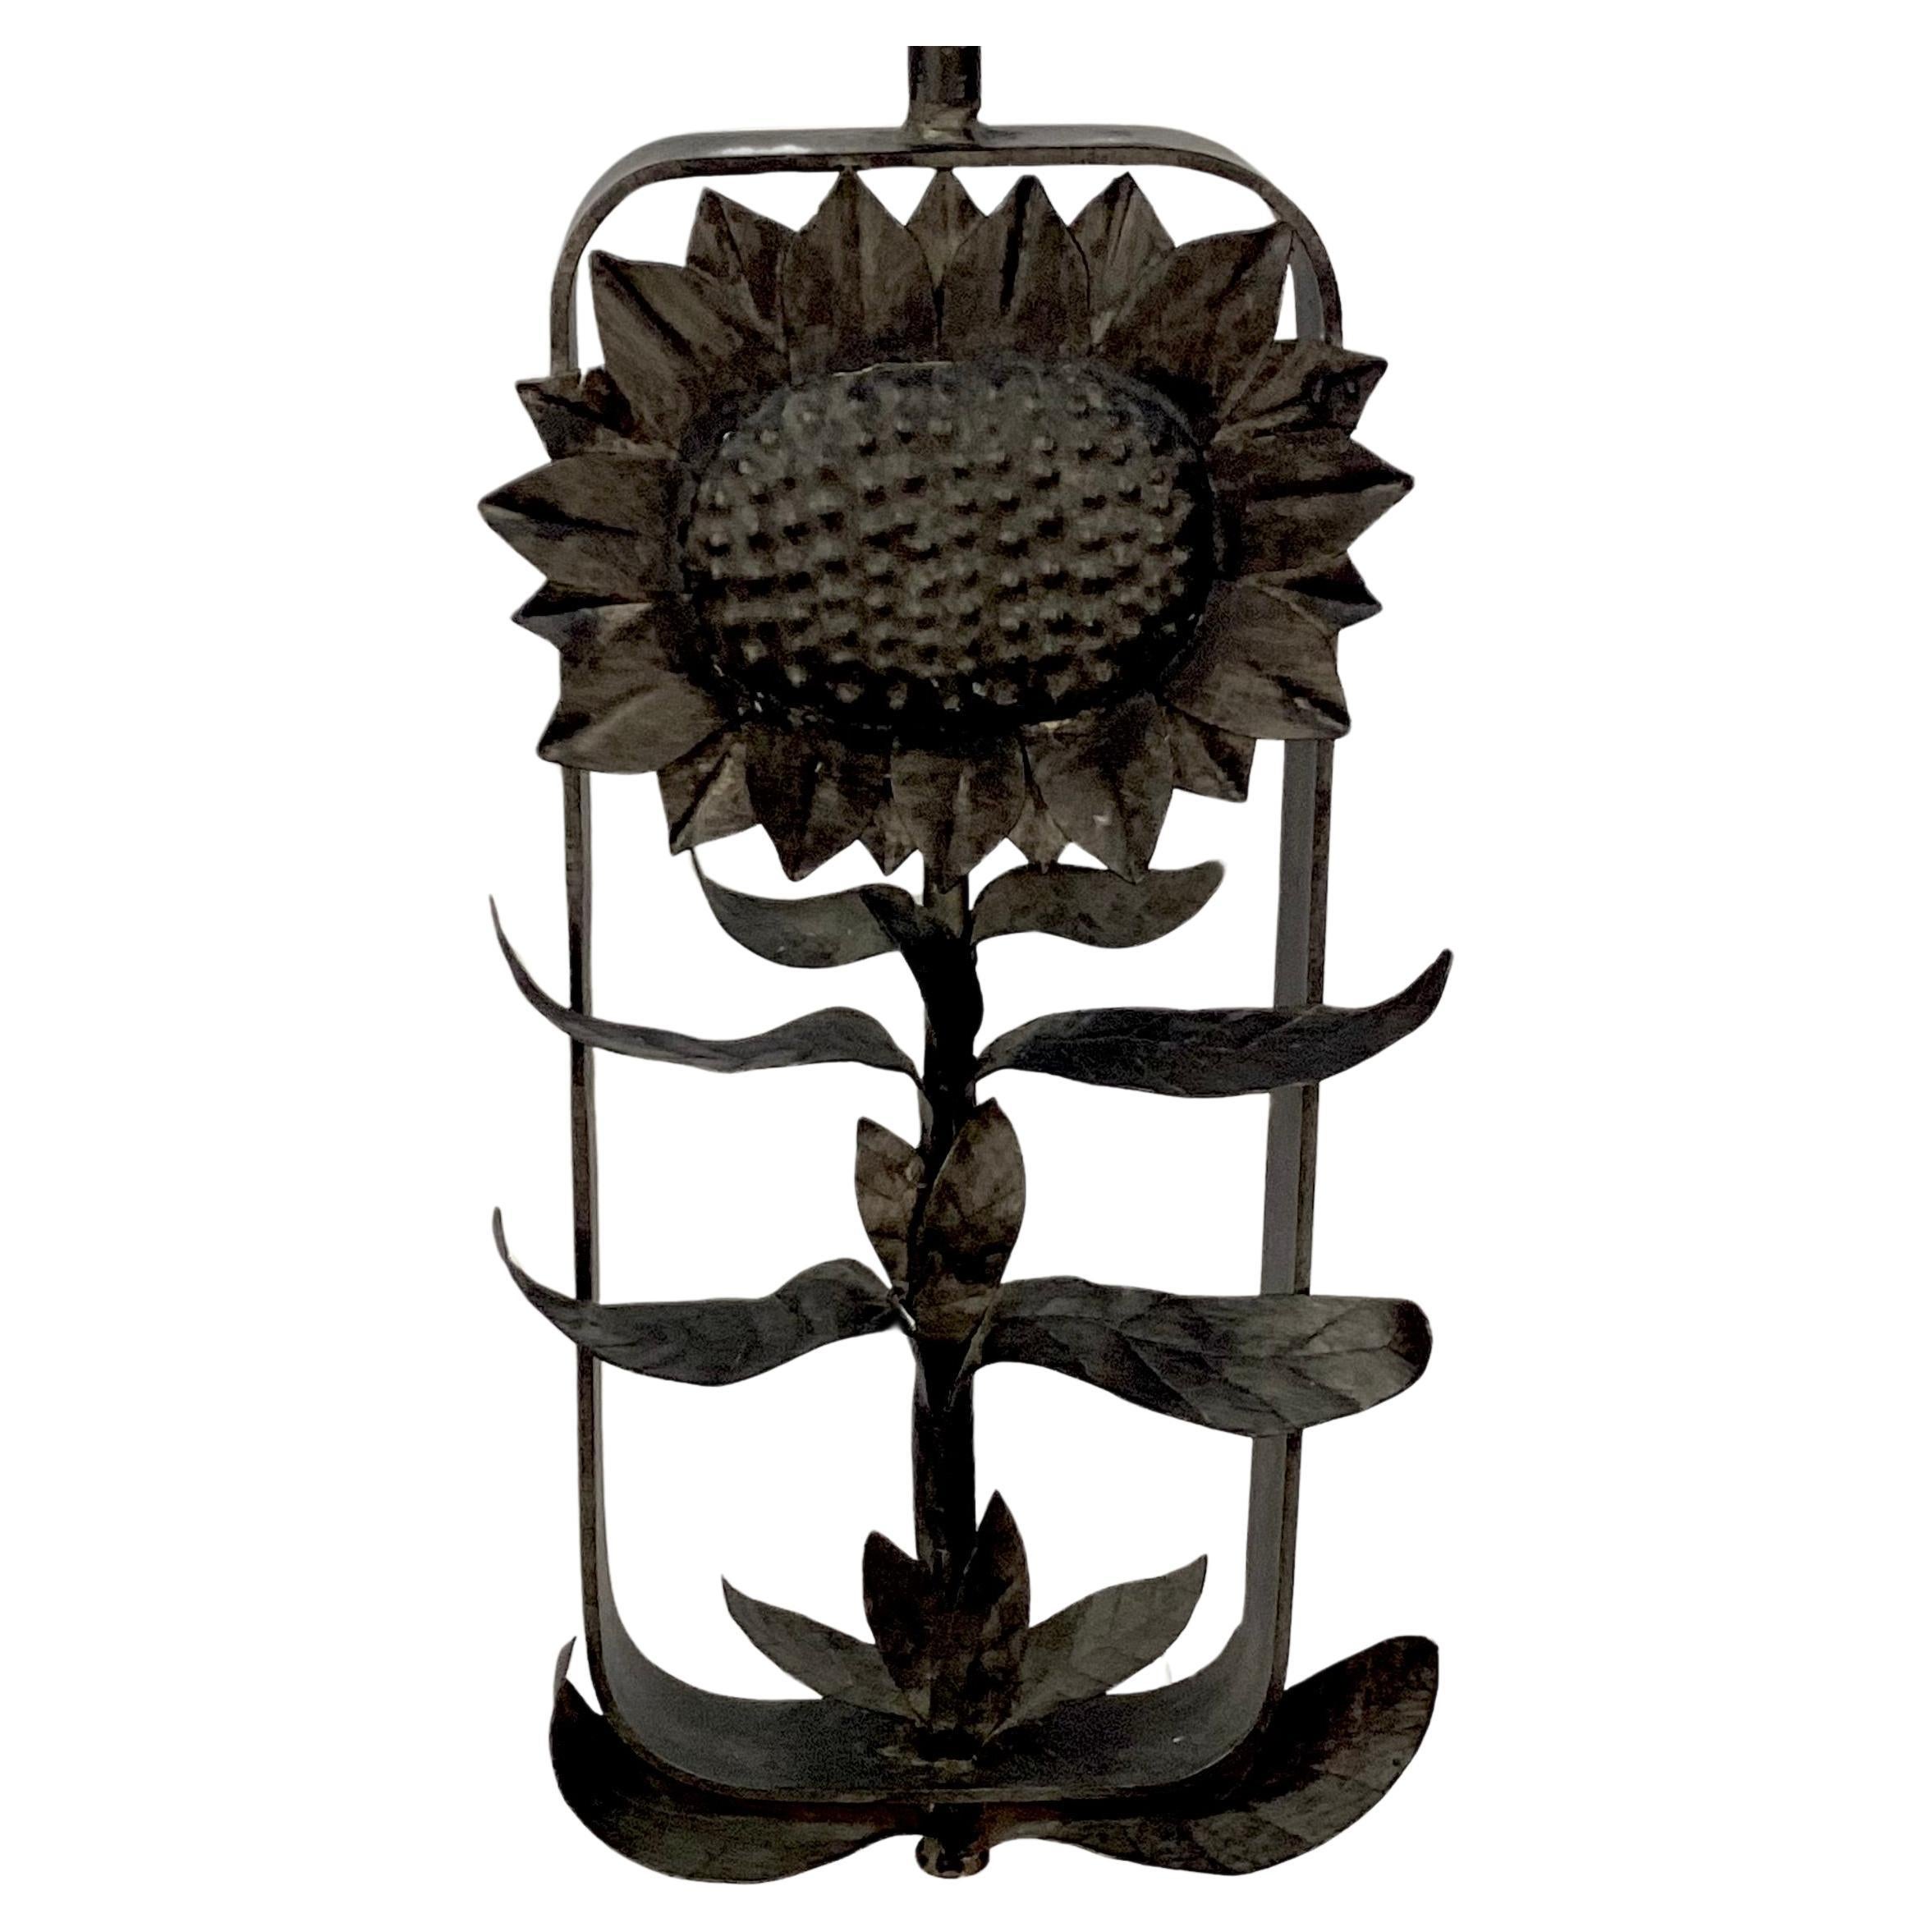 Unique one of a kind iron lamp with base of sculpted into a large sunflower face with stalk and leaves, all on a rectangular clear Lucite base. Lamp features a small sunflower finial to match. Would look great on a porch or in a sunroom, but is